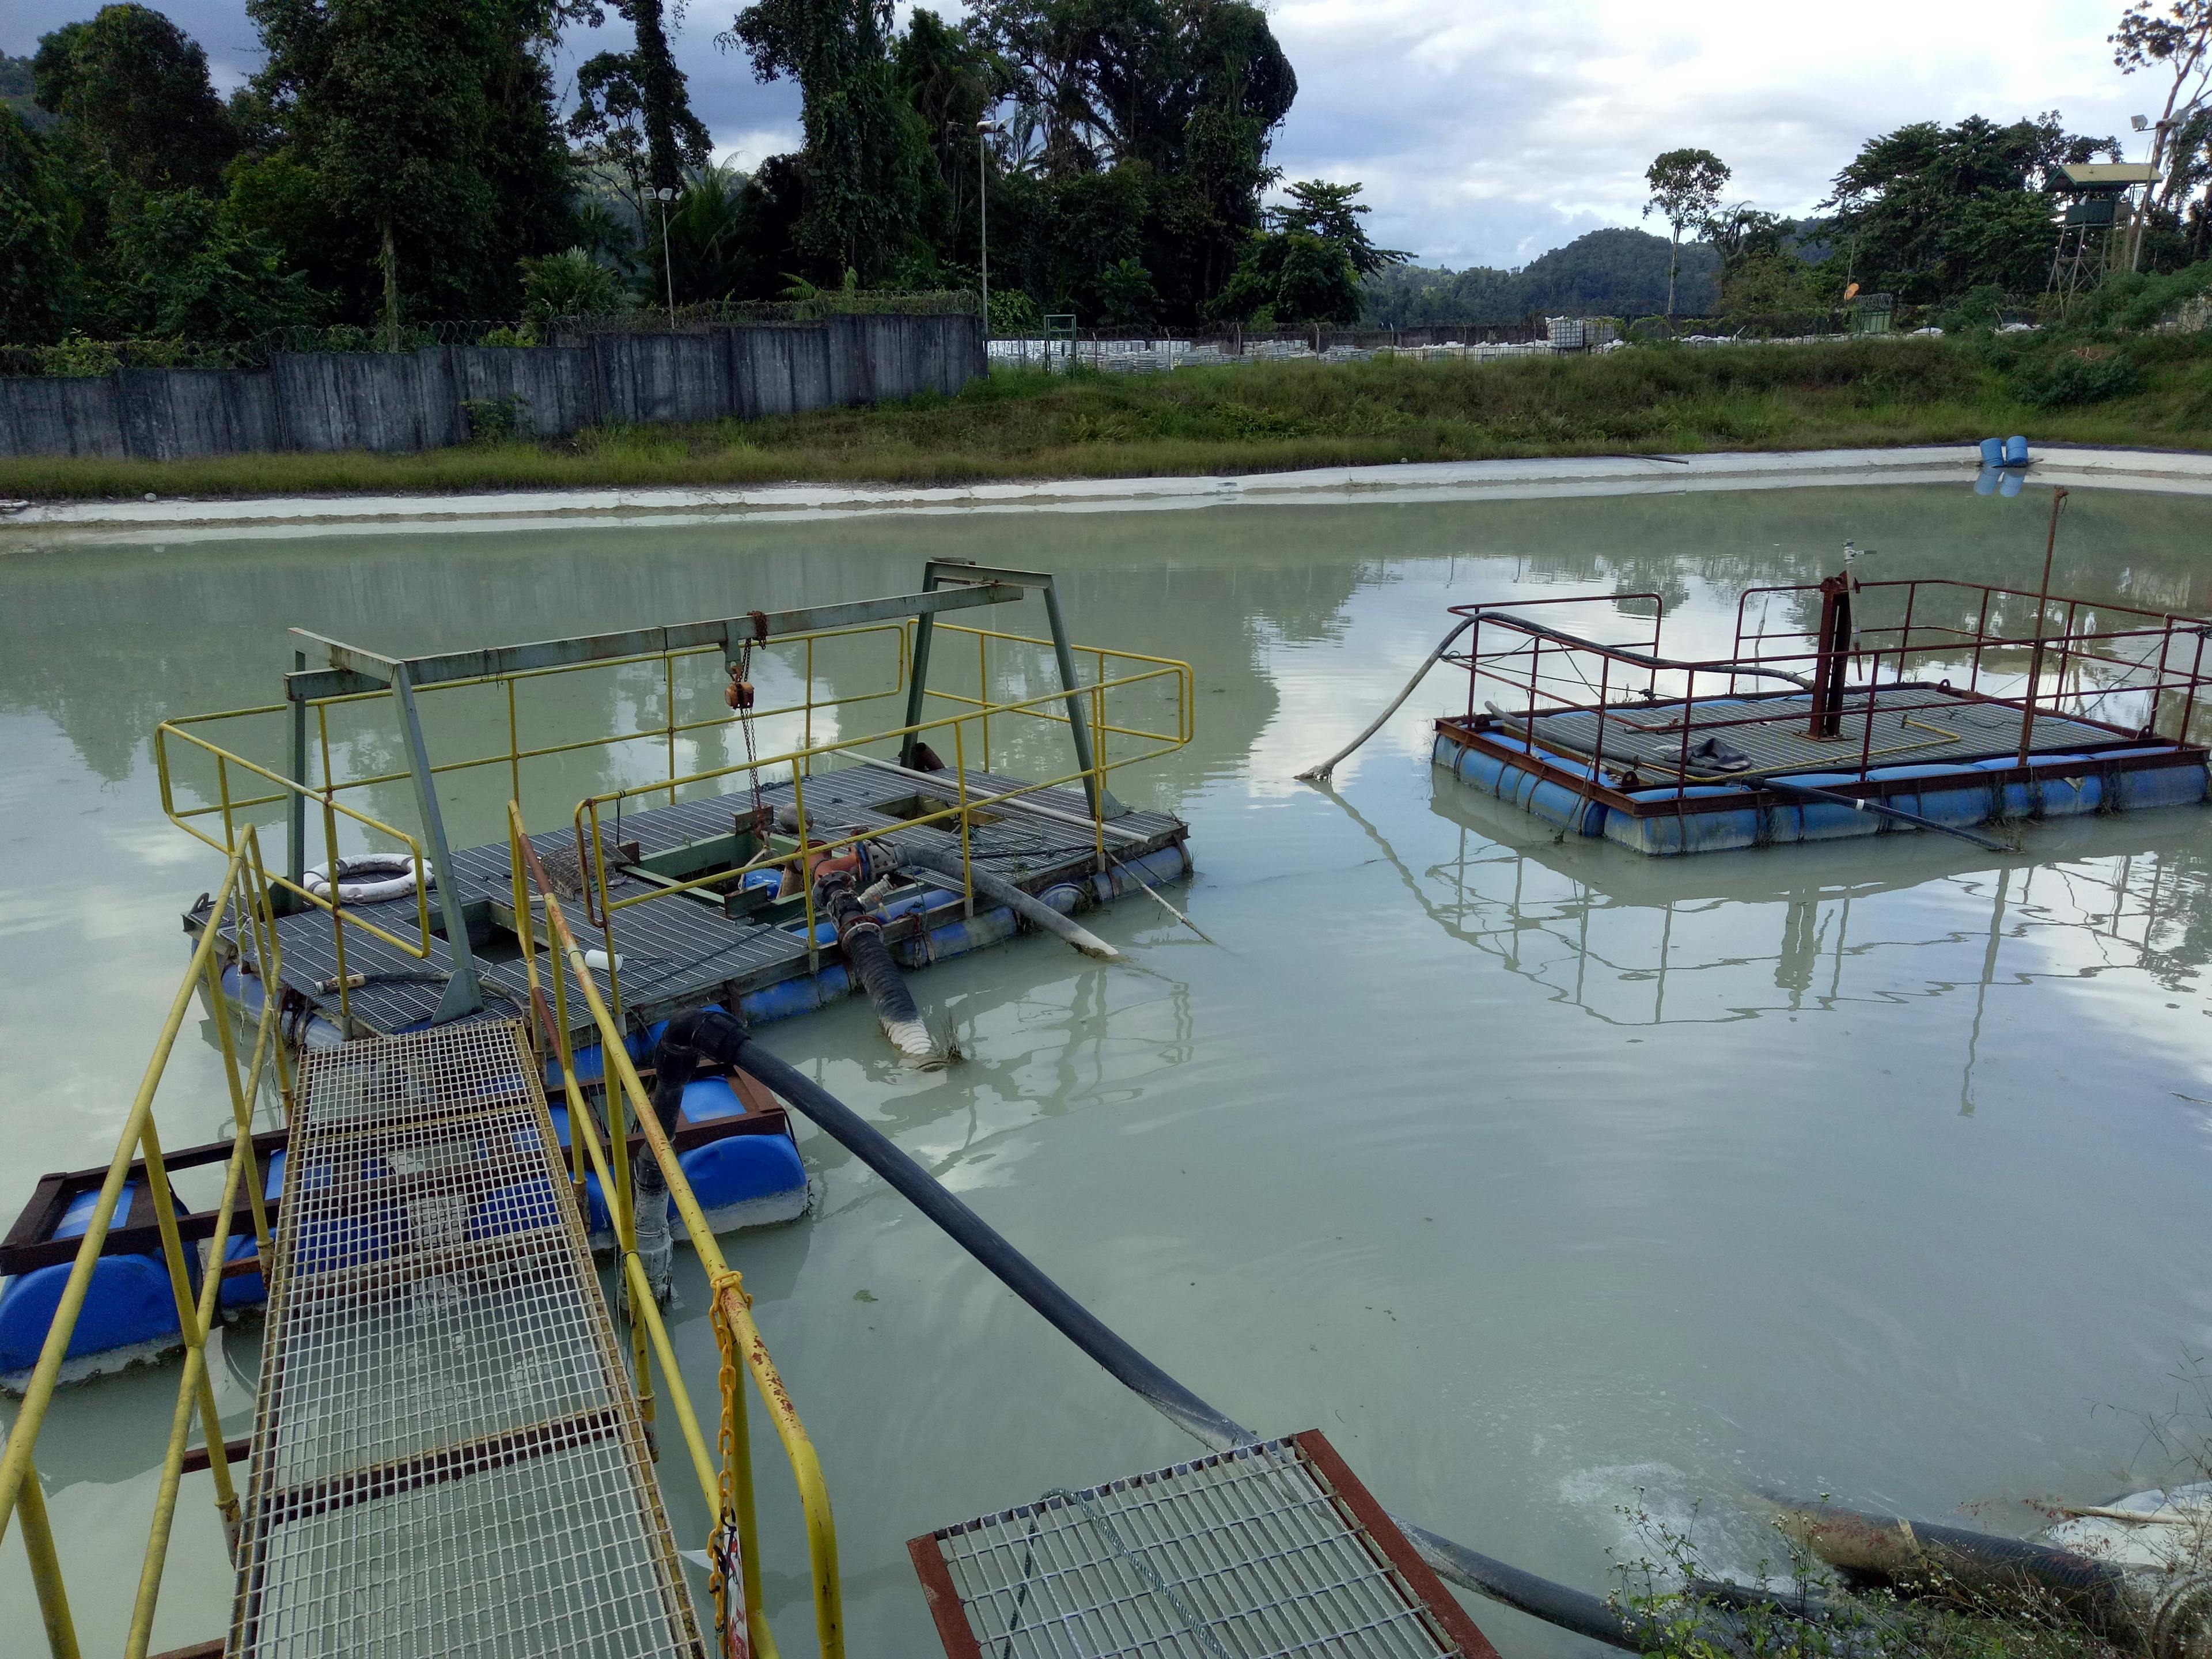 A remote gold mine located on an Indonesian island required the dredging of heavily silted settling ponds. These ponds contained valuable gold deposits that needed to be recovered and reprocessed.